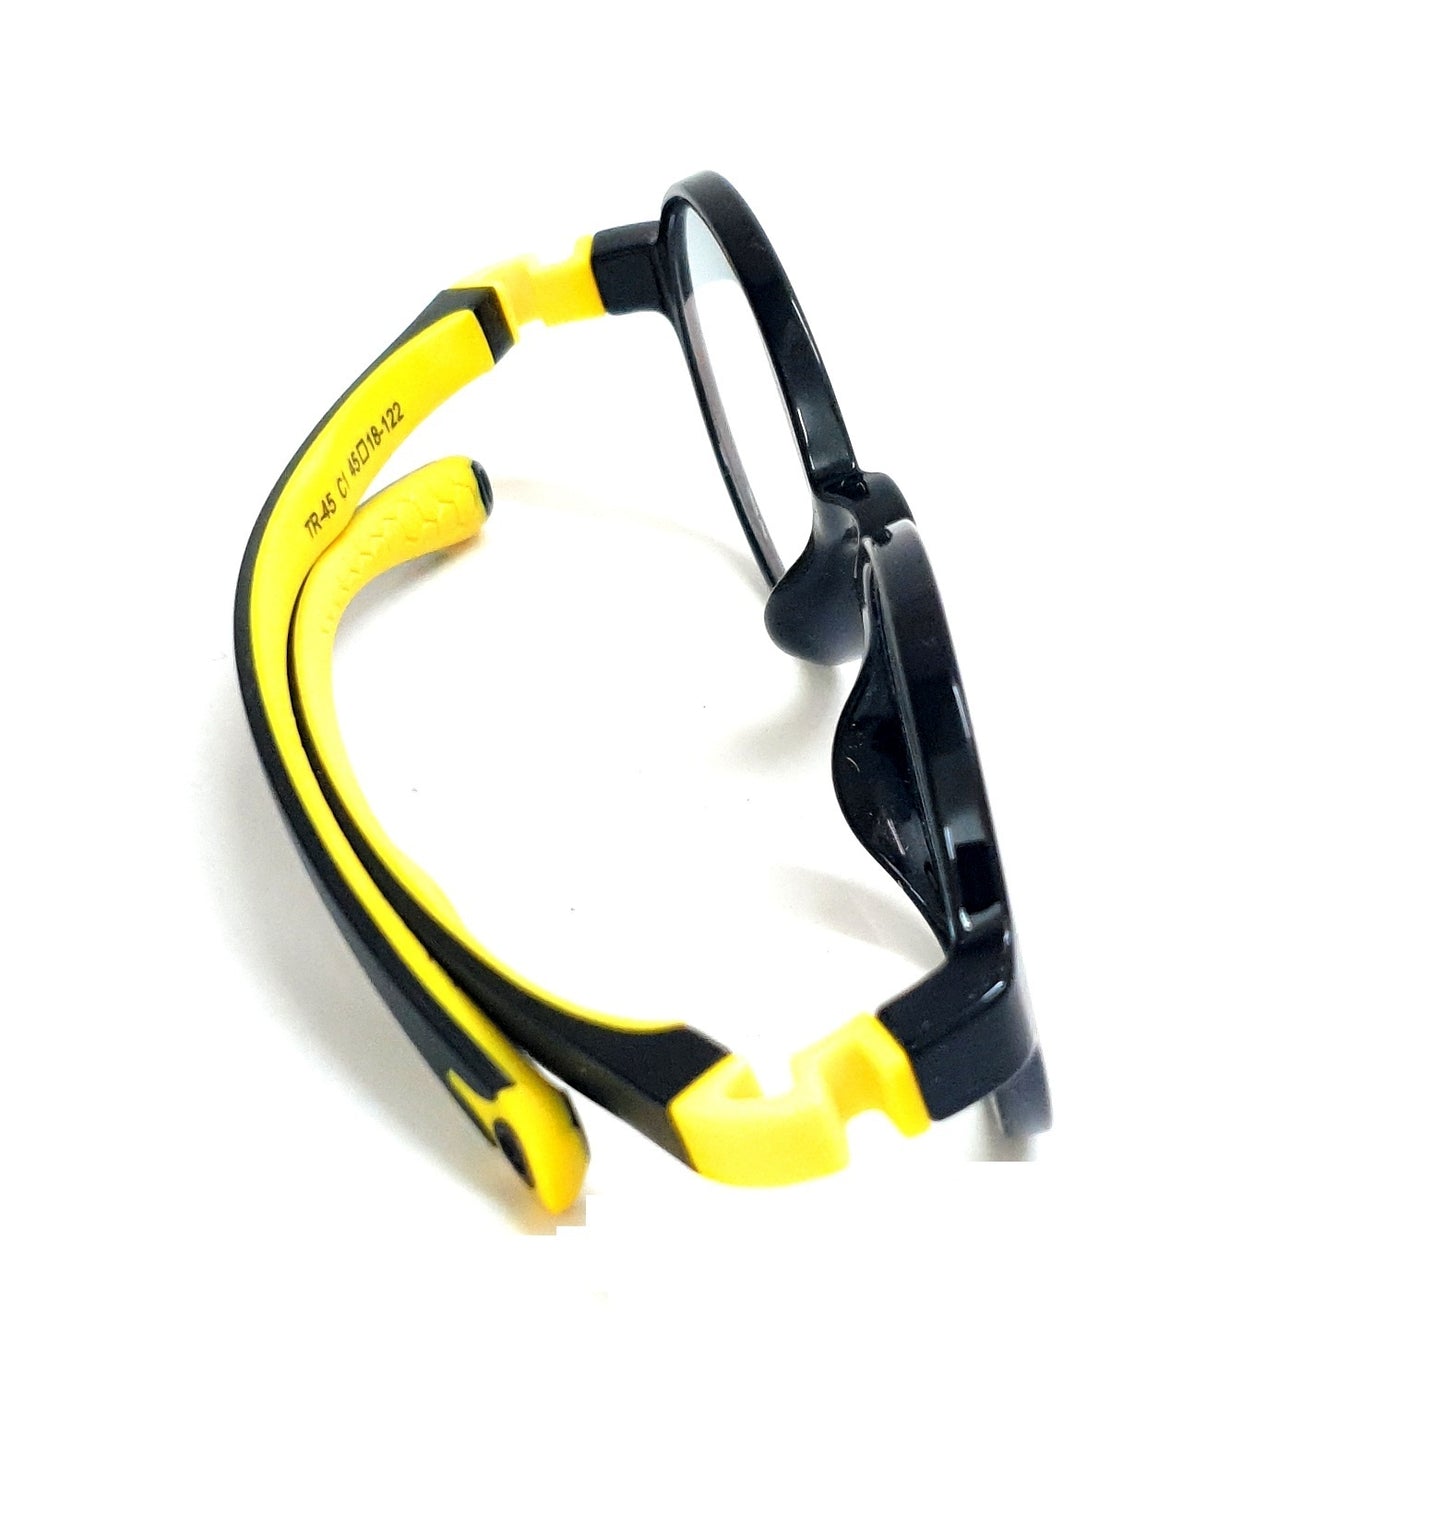 Affaires Kids Blue Light Filter Computer Glasses Flexible Spectacles with anti-reflection for Eye Protection | Zero Power (BC-263) Black-Yellow